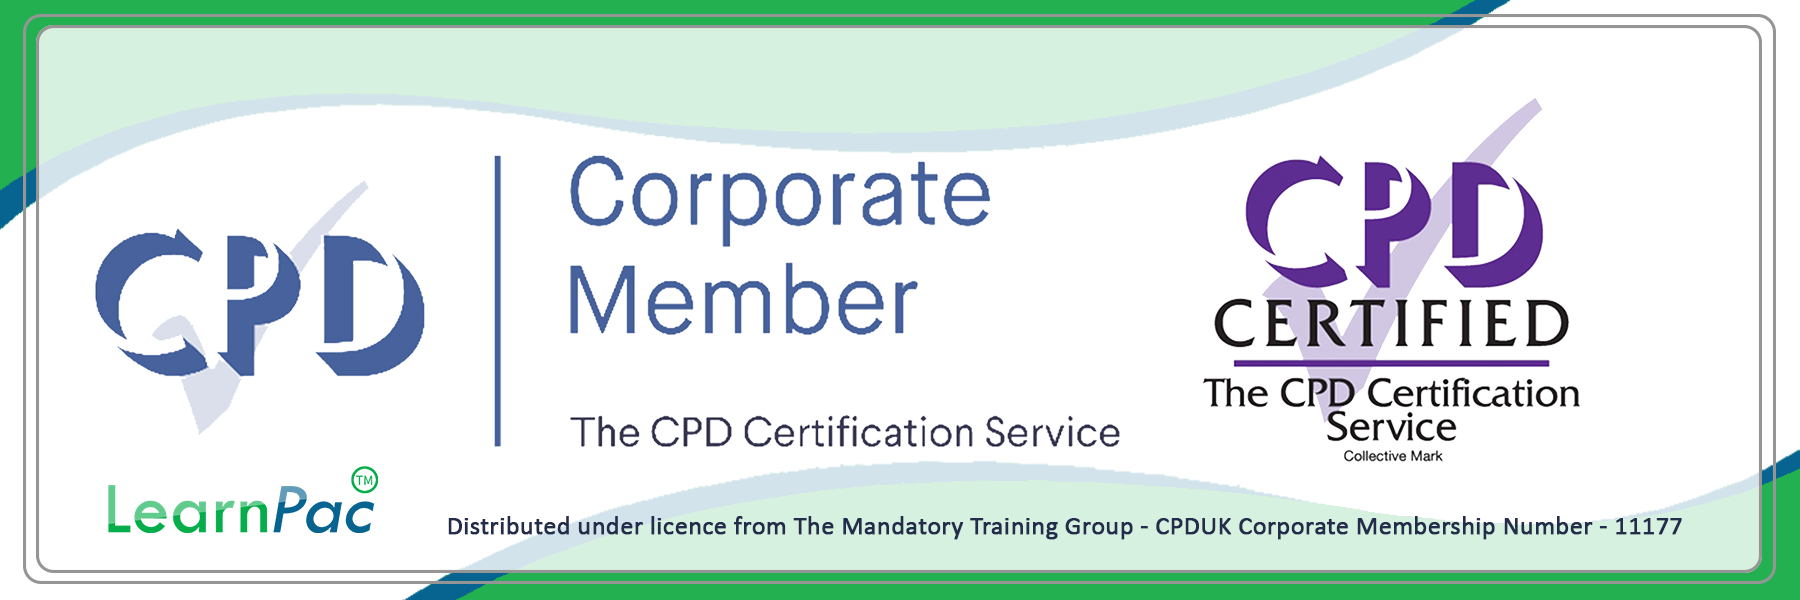 Healthcare Courses and Training - E-Learning Courses with Certificates - CPD Certified - LearnPac Systems UK -